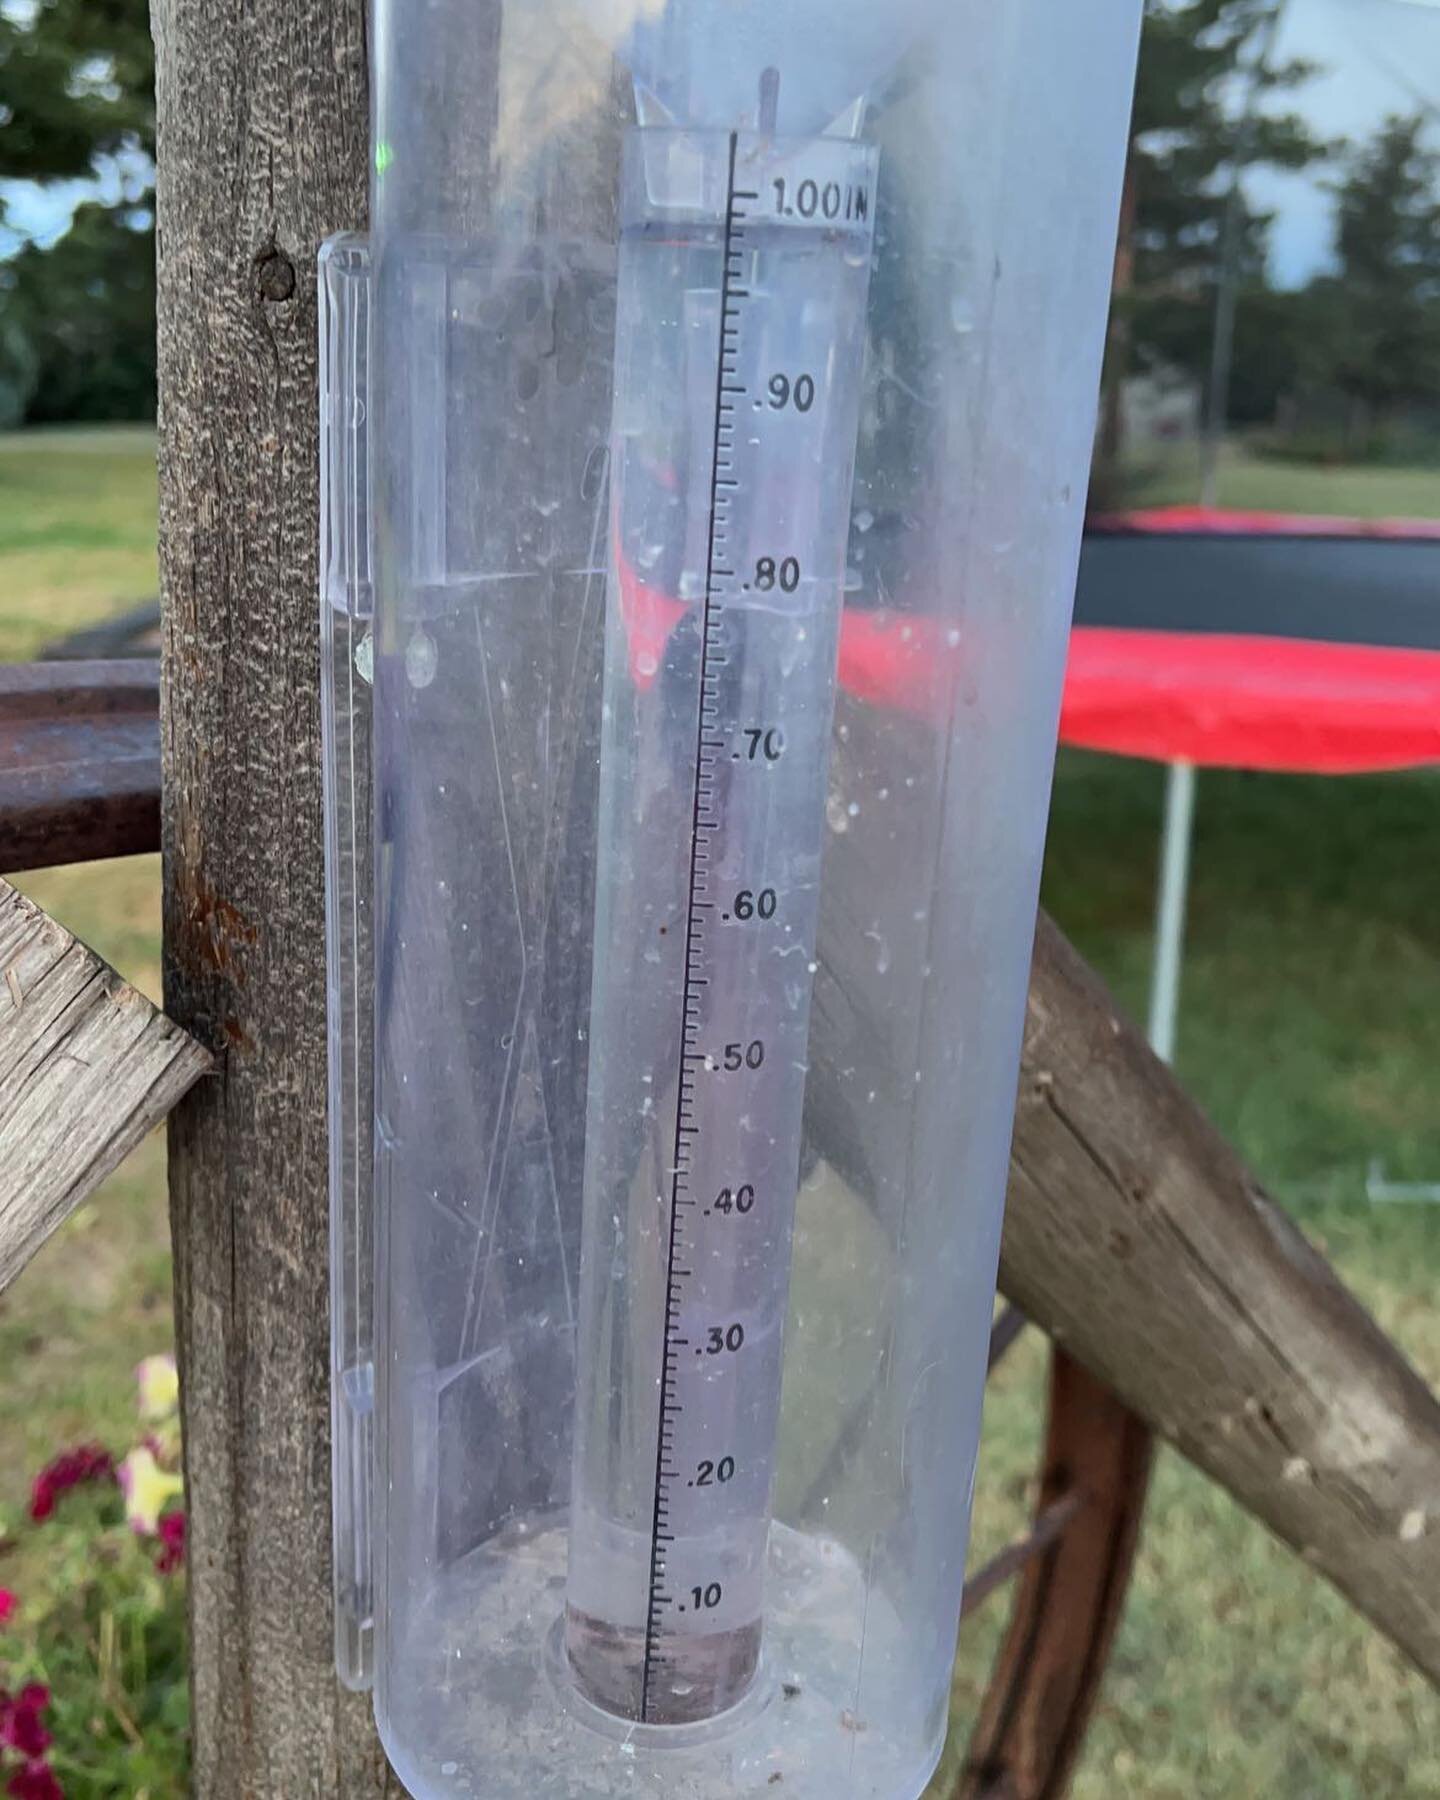 This won&rsquo;t seem like much to most because your rain loads have been heavy.

But this rain gauge has collected more dust and bugs in the past 2 years then it has rain.

An inch, last night we received an inch at our homestead. An inch isn&rsquo;